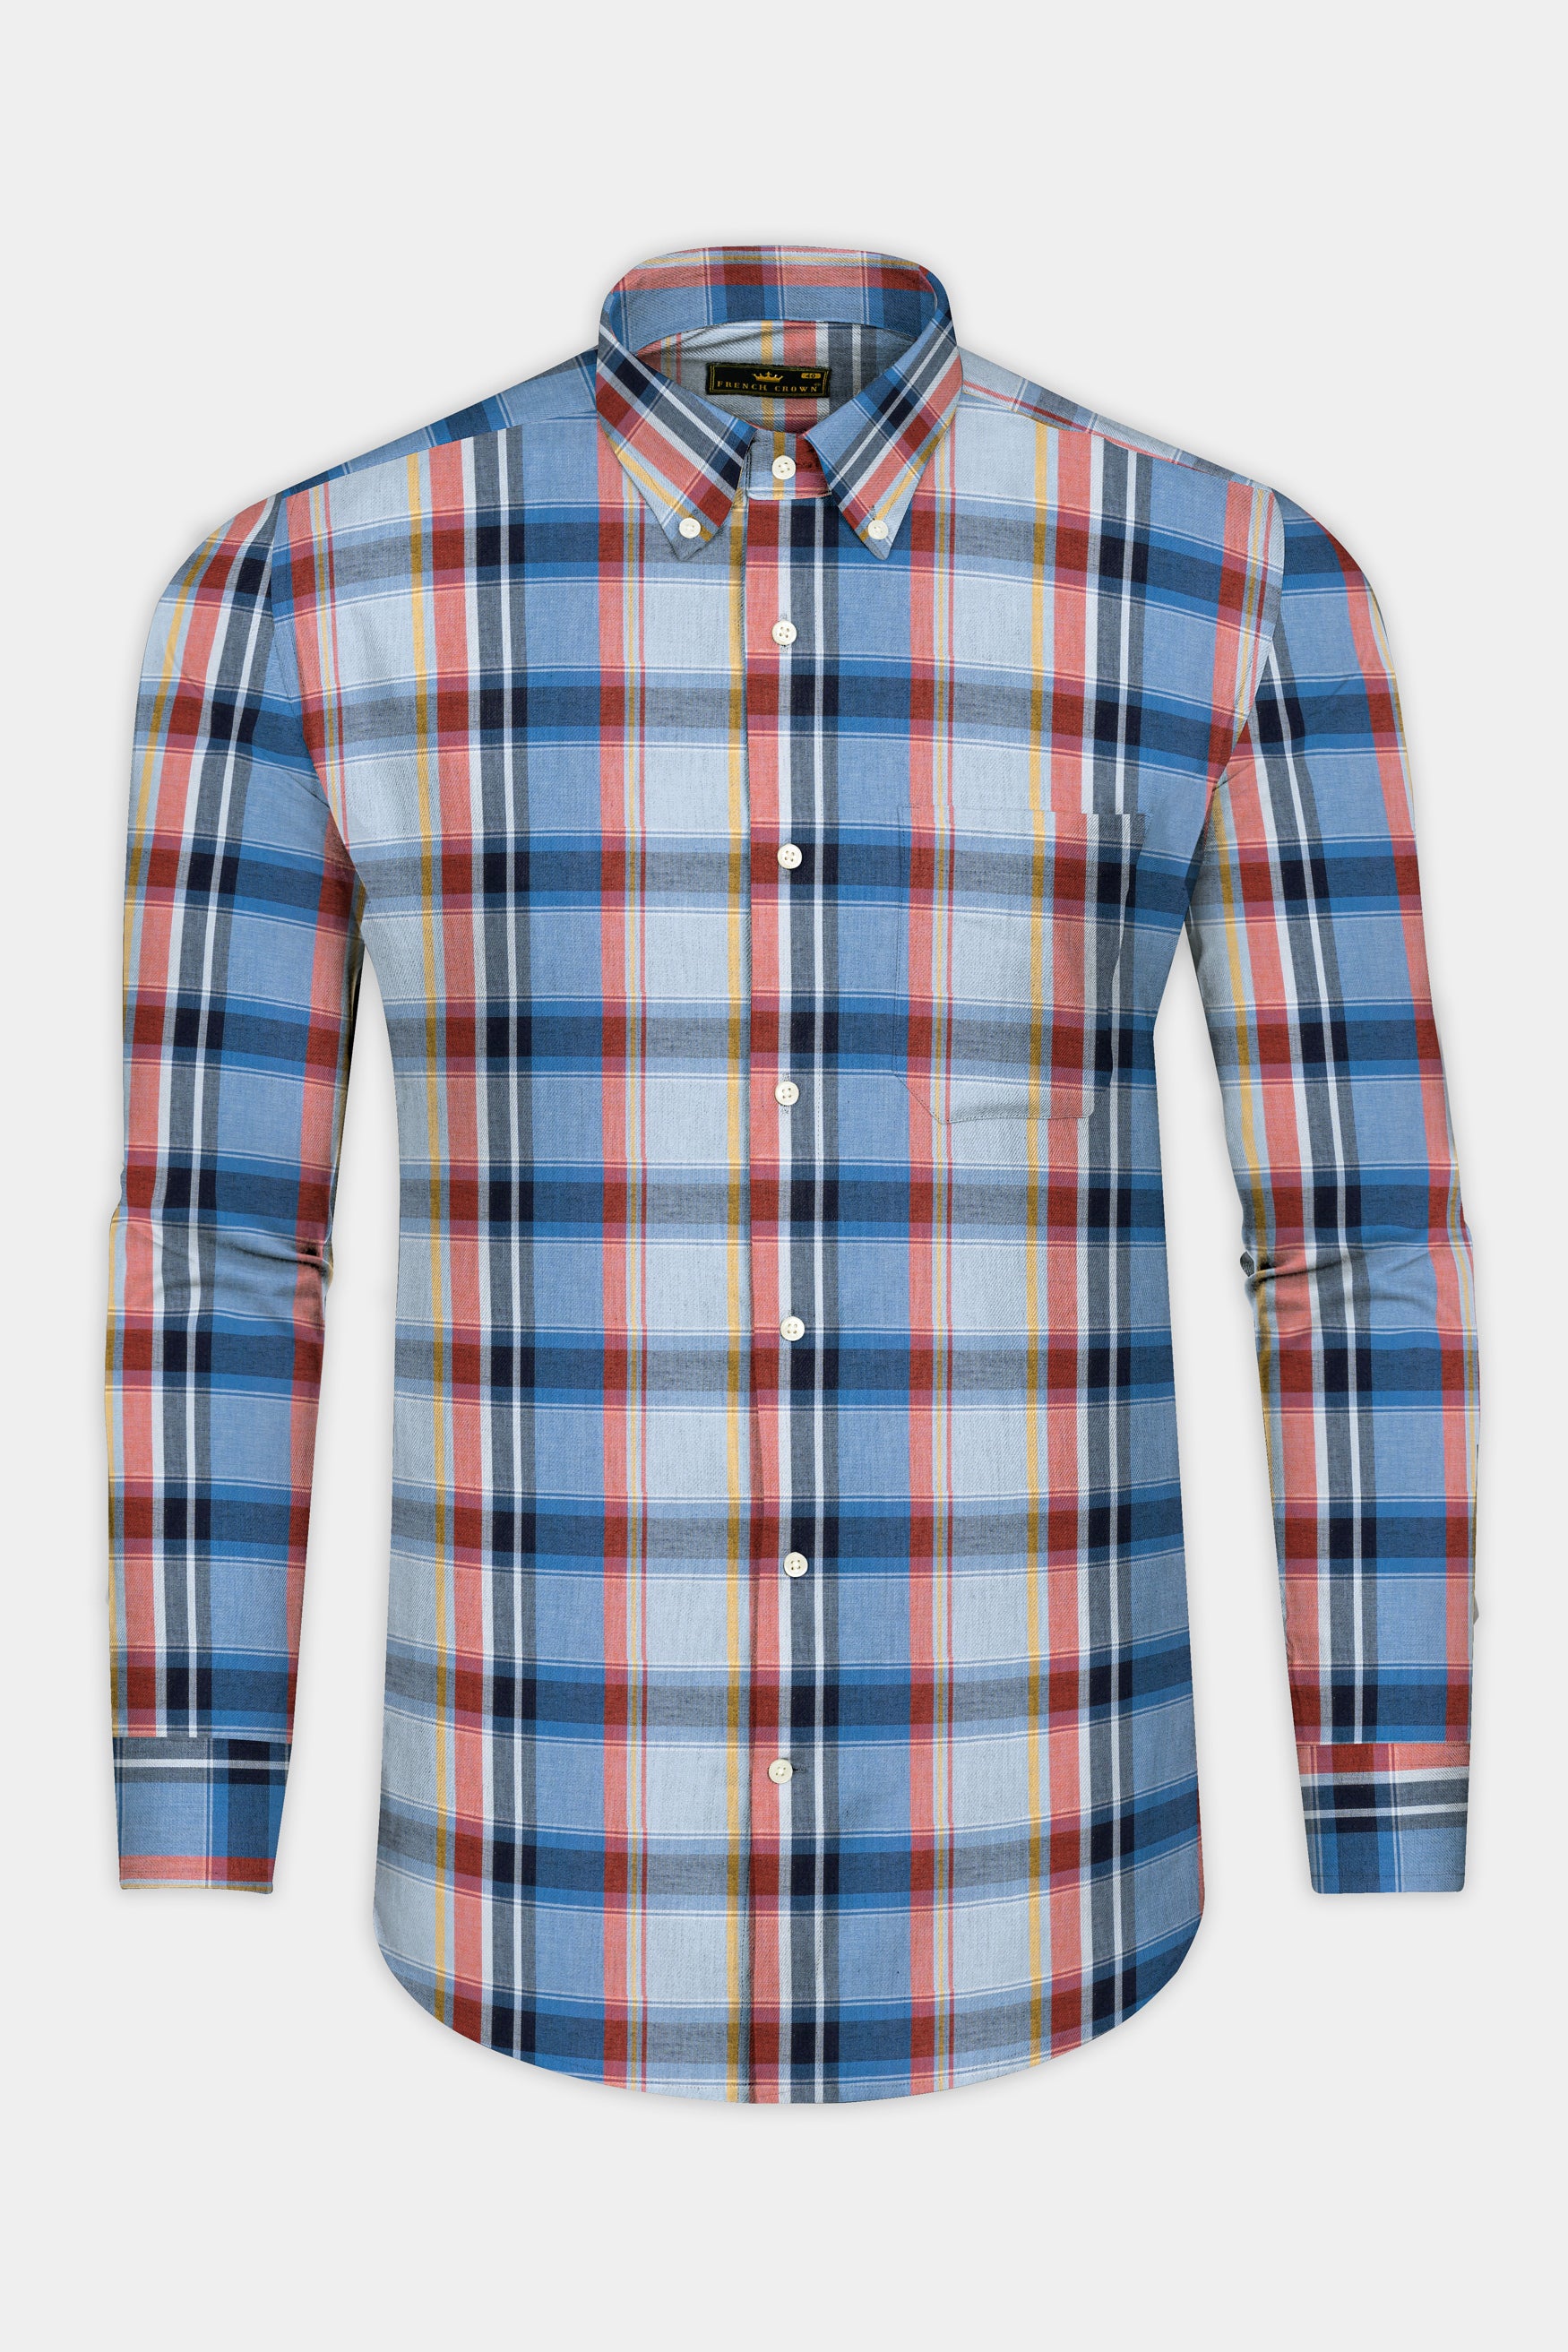 Heather Gray with Poppy Red and Rock Blue Plaid Super Soft Poplin shirt